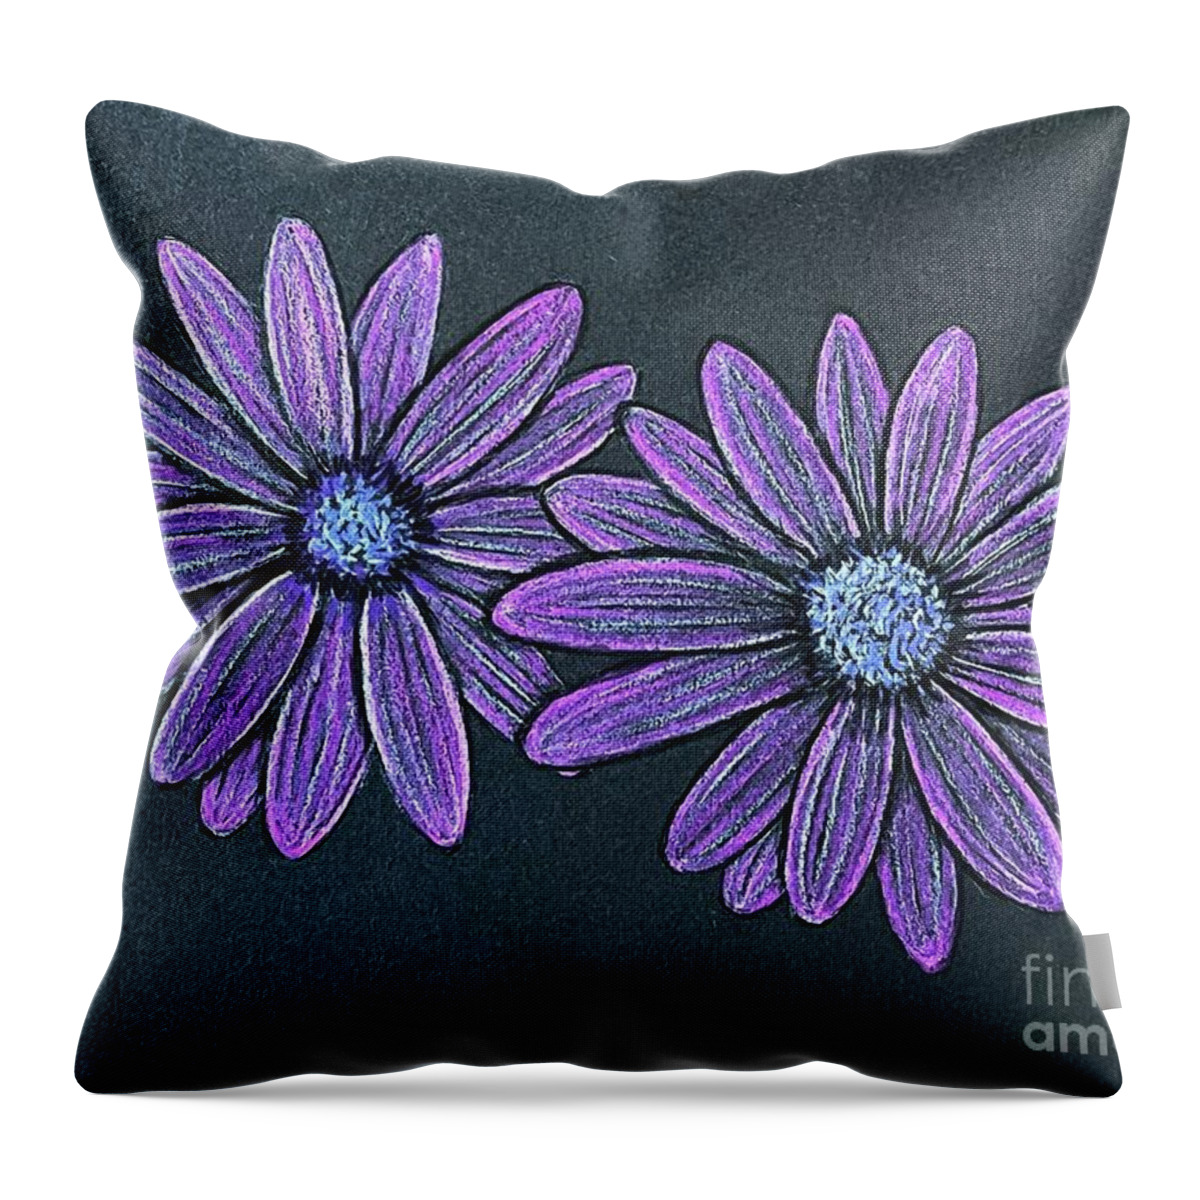  Throw Pillow featuring the digital art Practice Colored Pencil Daisies by Donna Mibus